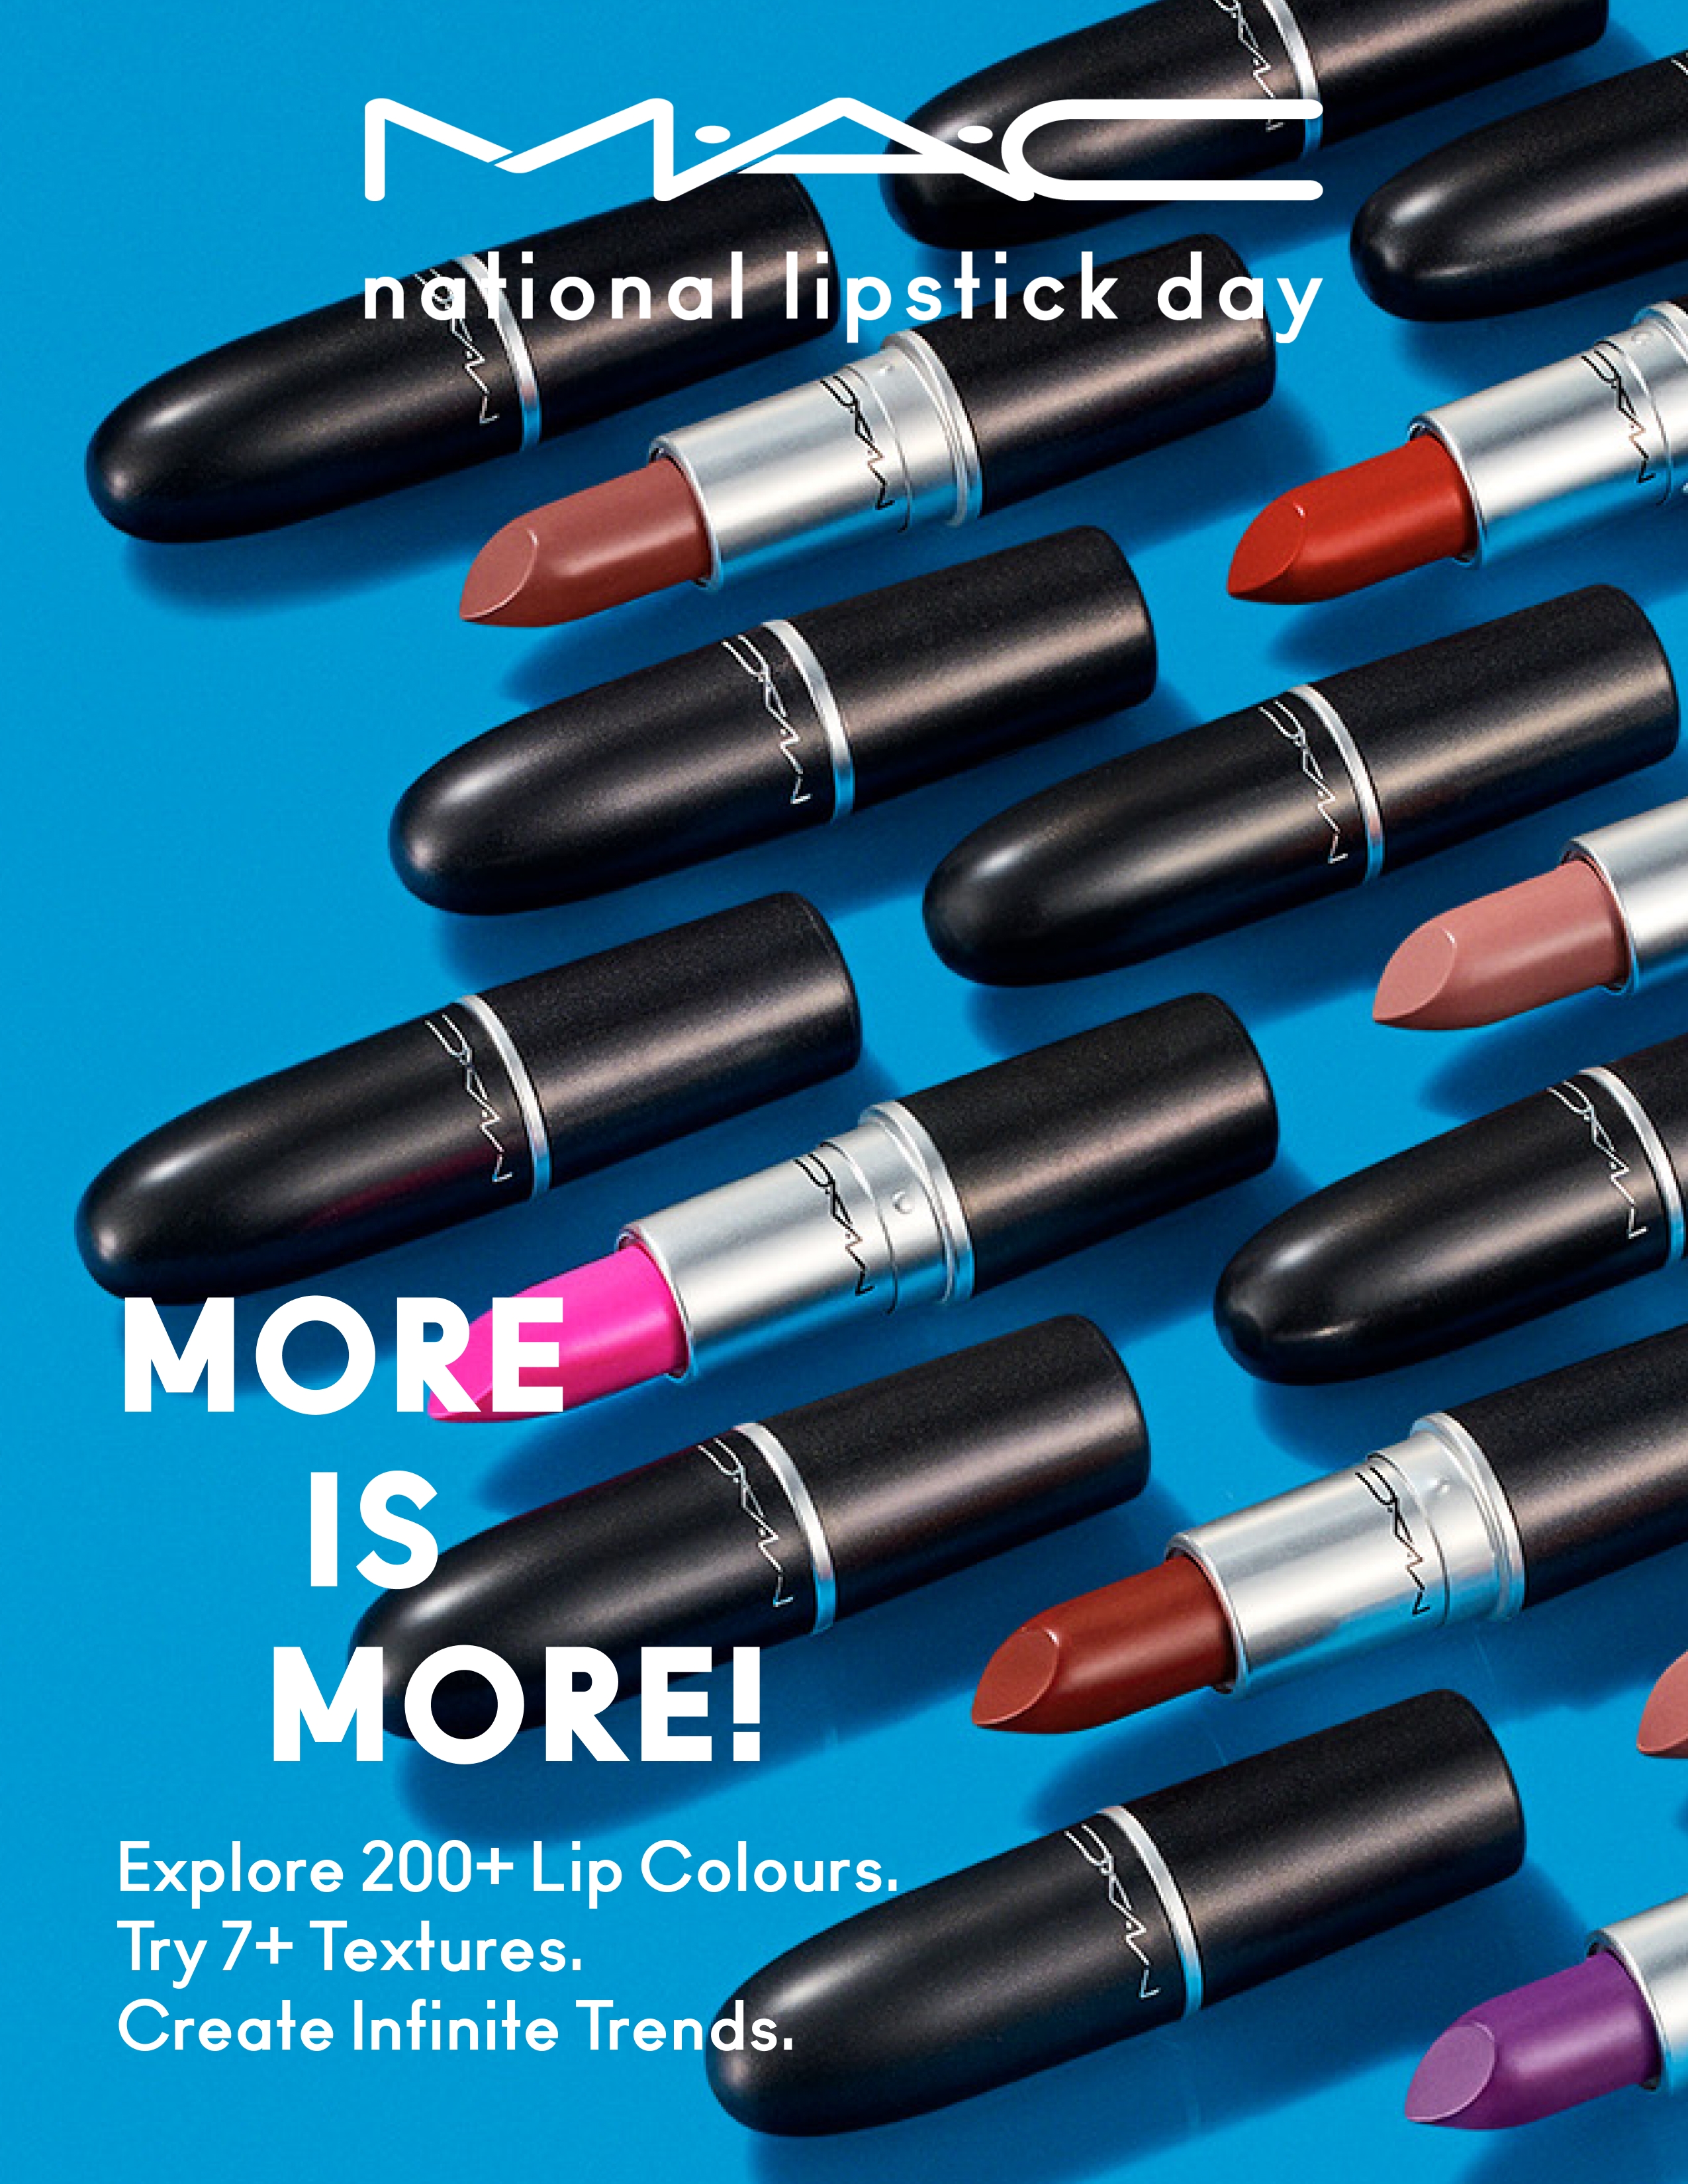 MORE IS MORE THIS NATIONAL LIPSTICK DAY!